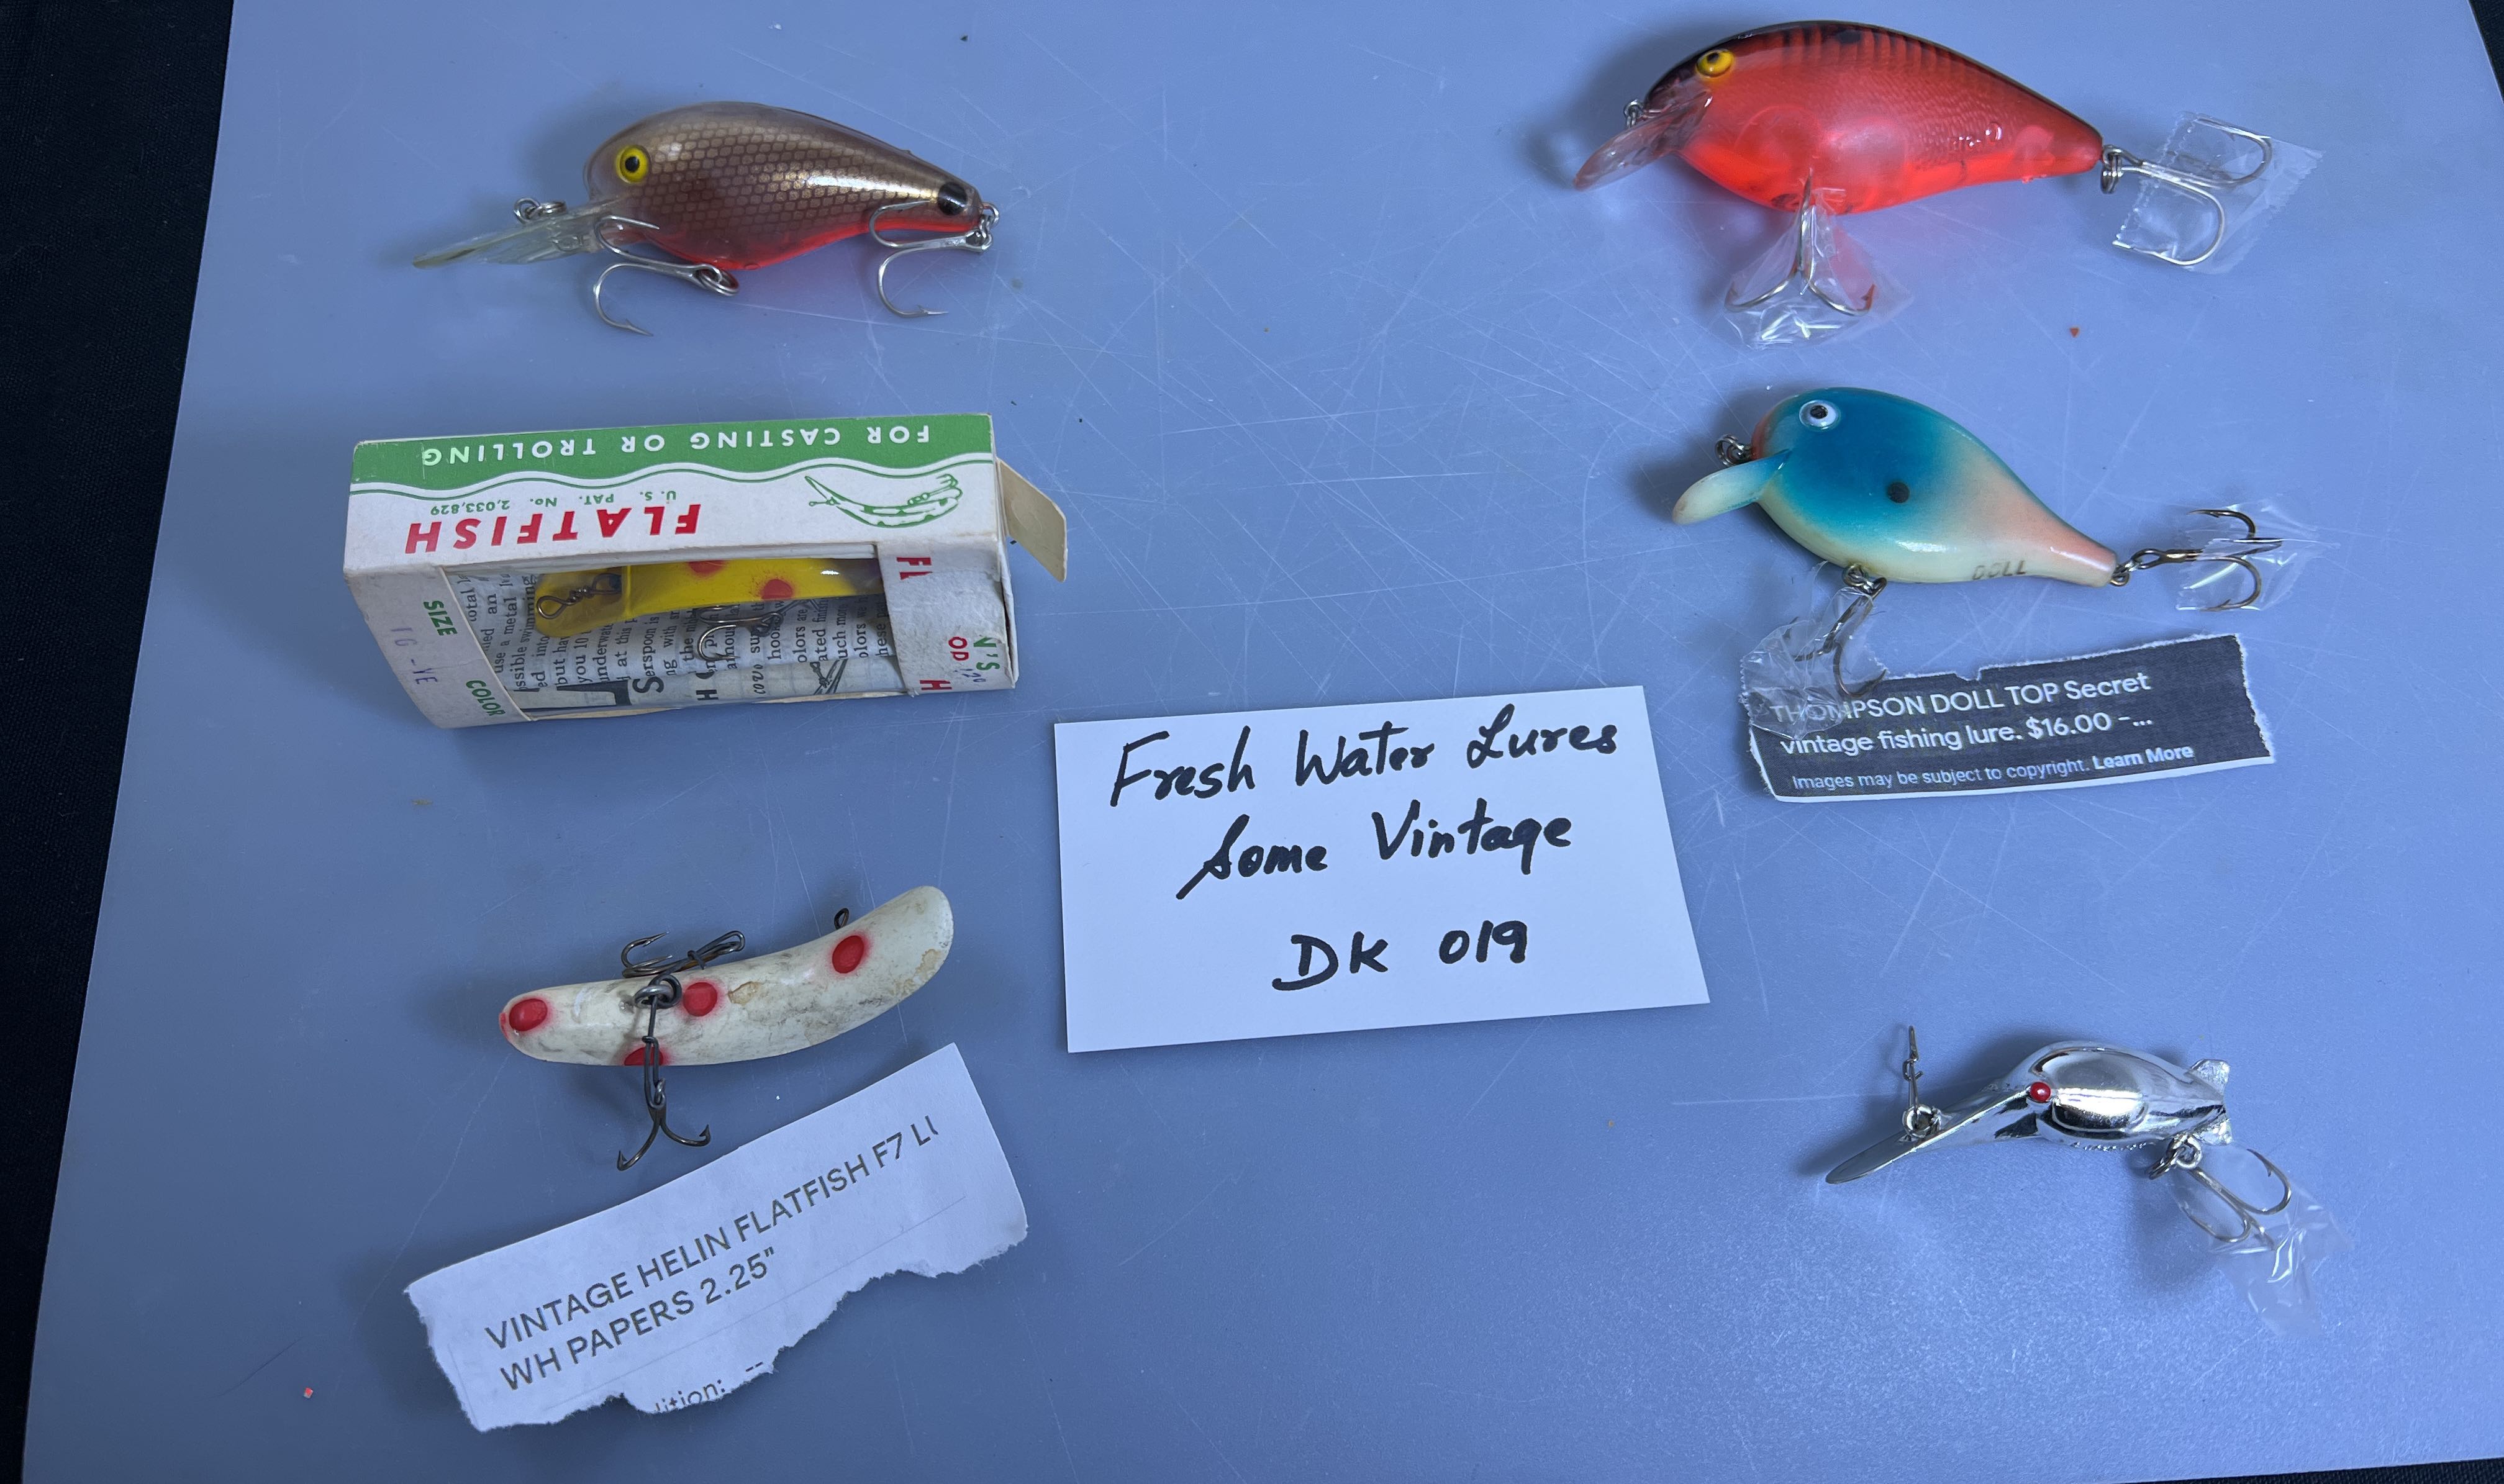 Freshwater-Lures-Some-Vintage